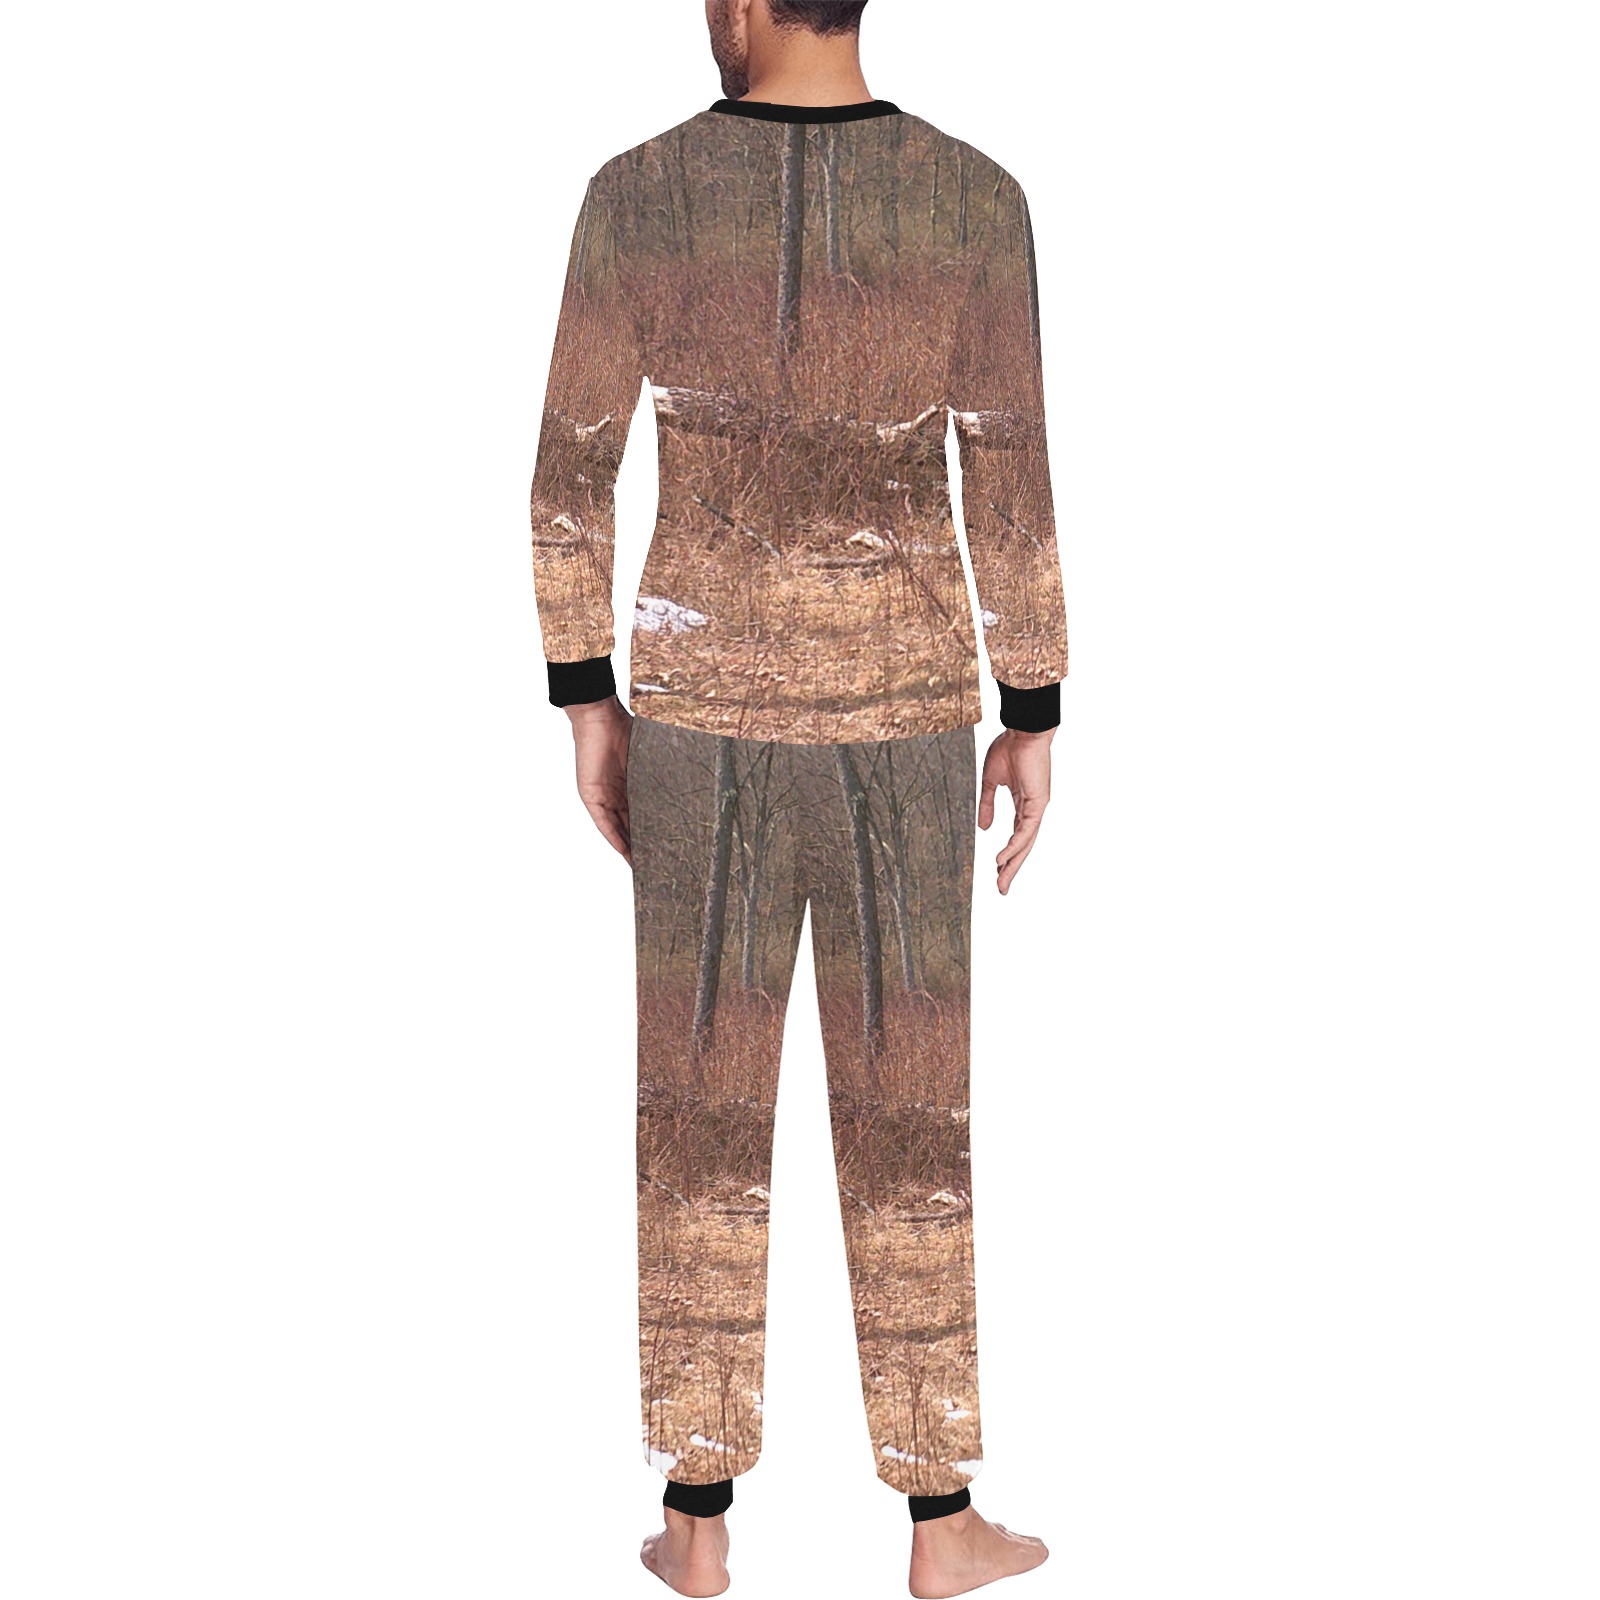 Falling tree in the woods Men's All Over Print Pajama Set